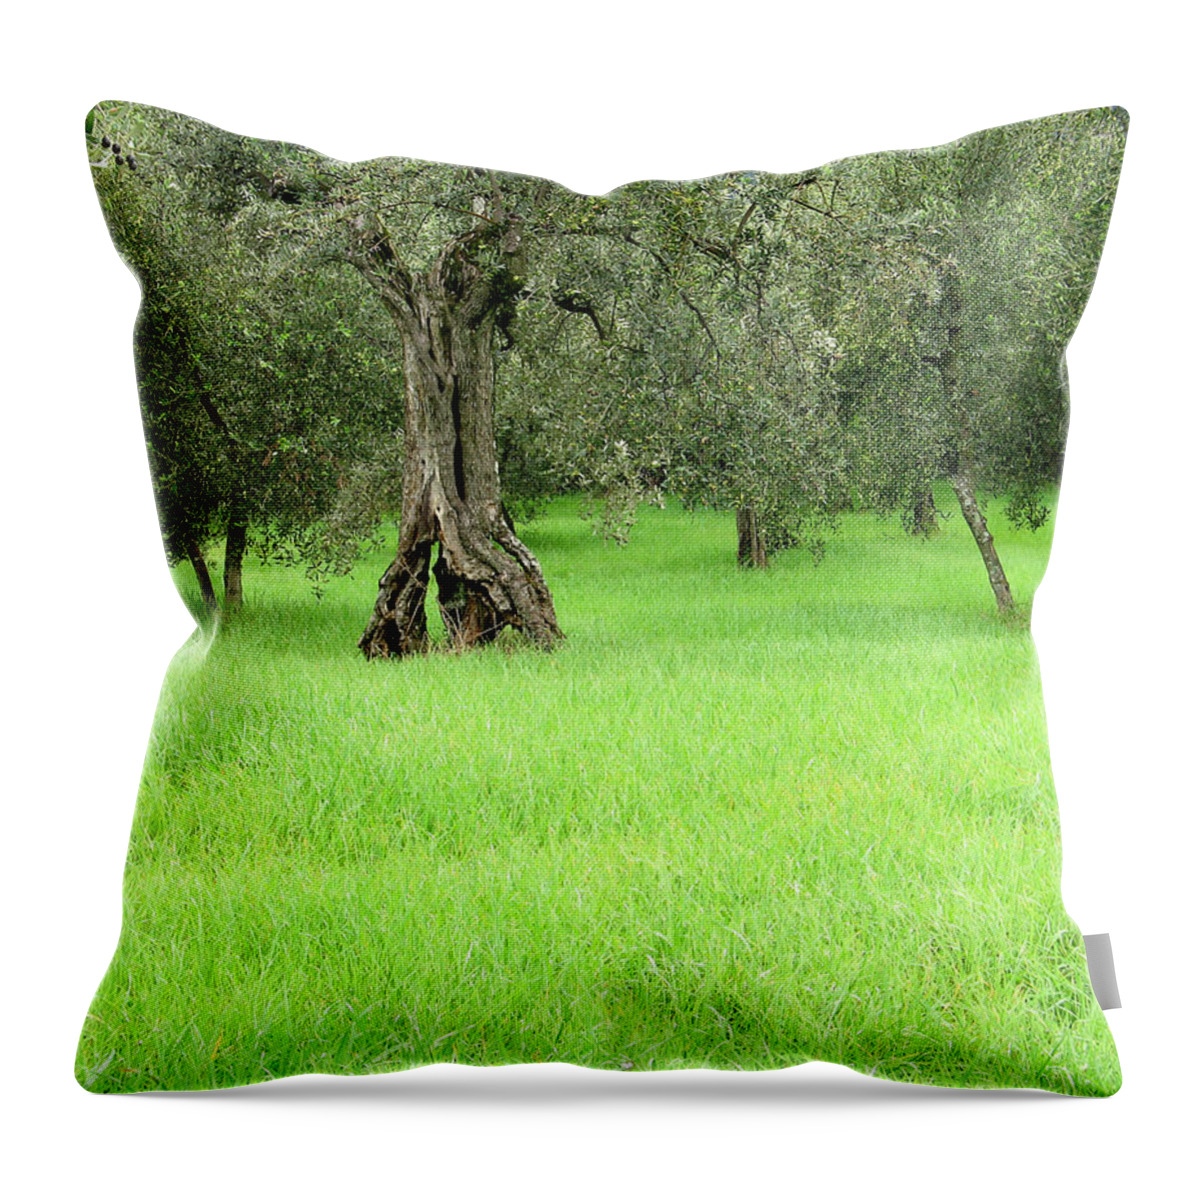 Olive Throw Pillow featuring the photograph Tuscan Olive Grove I by Greg Matchick